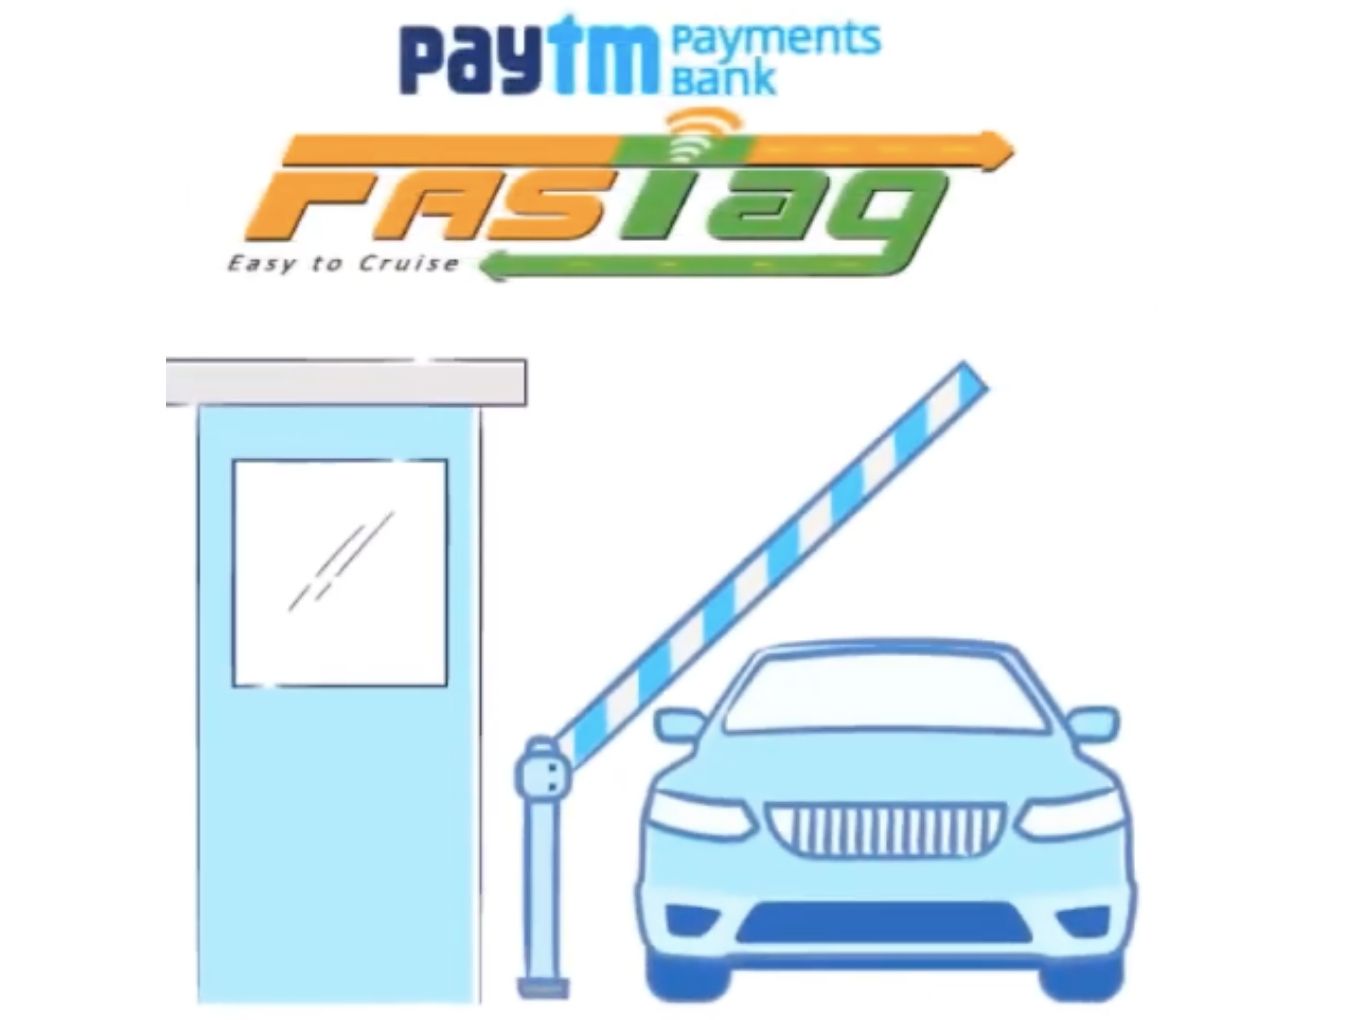 Paytm To Sell FASTags At 3.6 Lakh Common Service Centres Across India